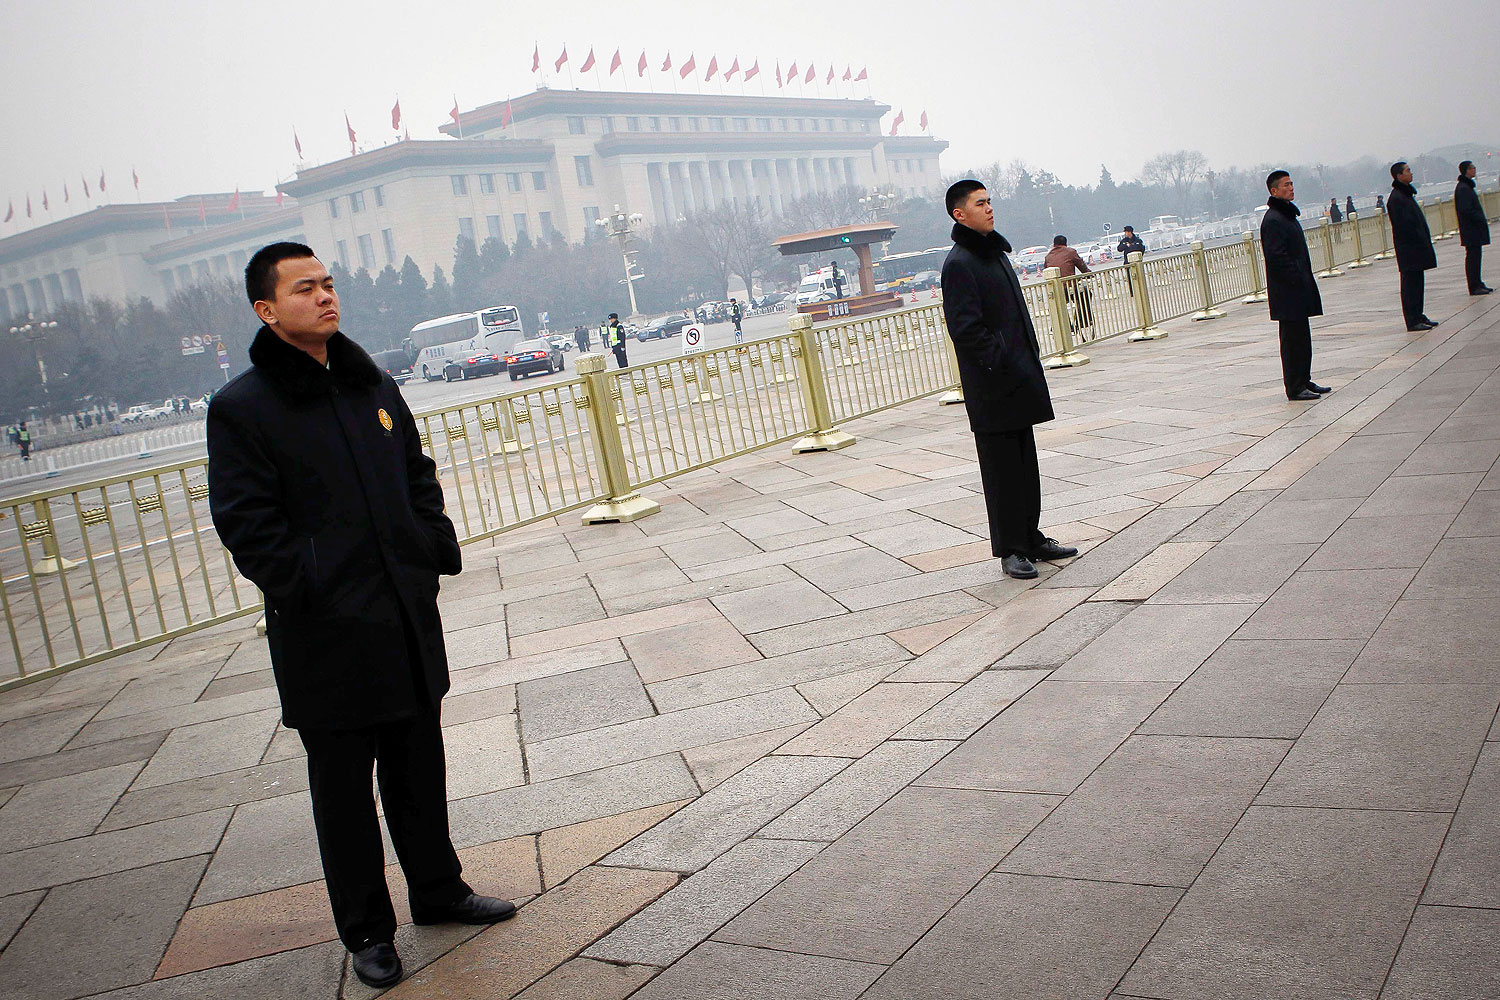 Chinese security guards stand in line in Tiananmen Square in Beijing, on March 3, 2014. Beijing has stepped up security for the NPC and CPPCC sessions this week (Gao zheng / Imaginechina / AP)